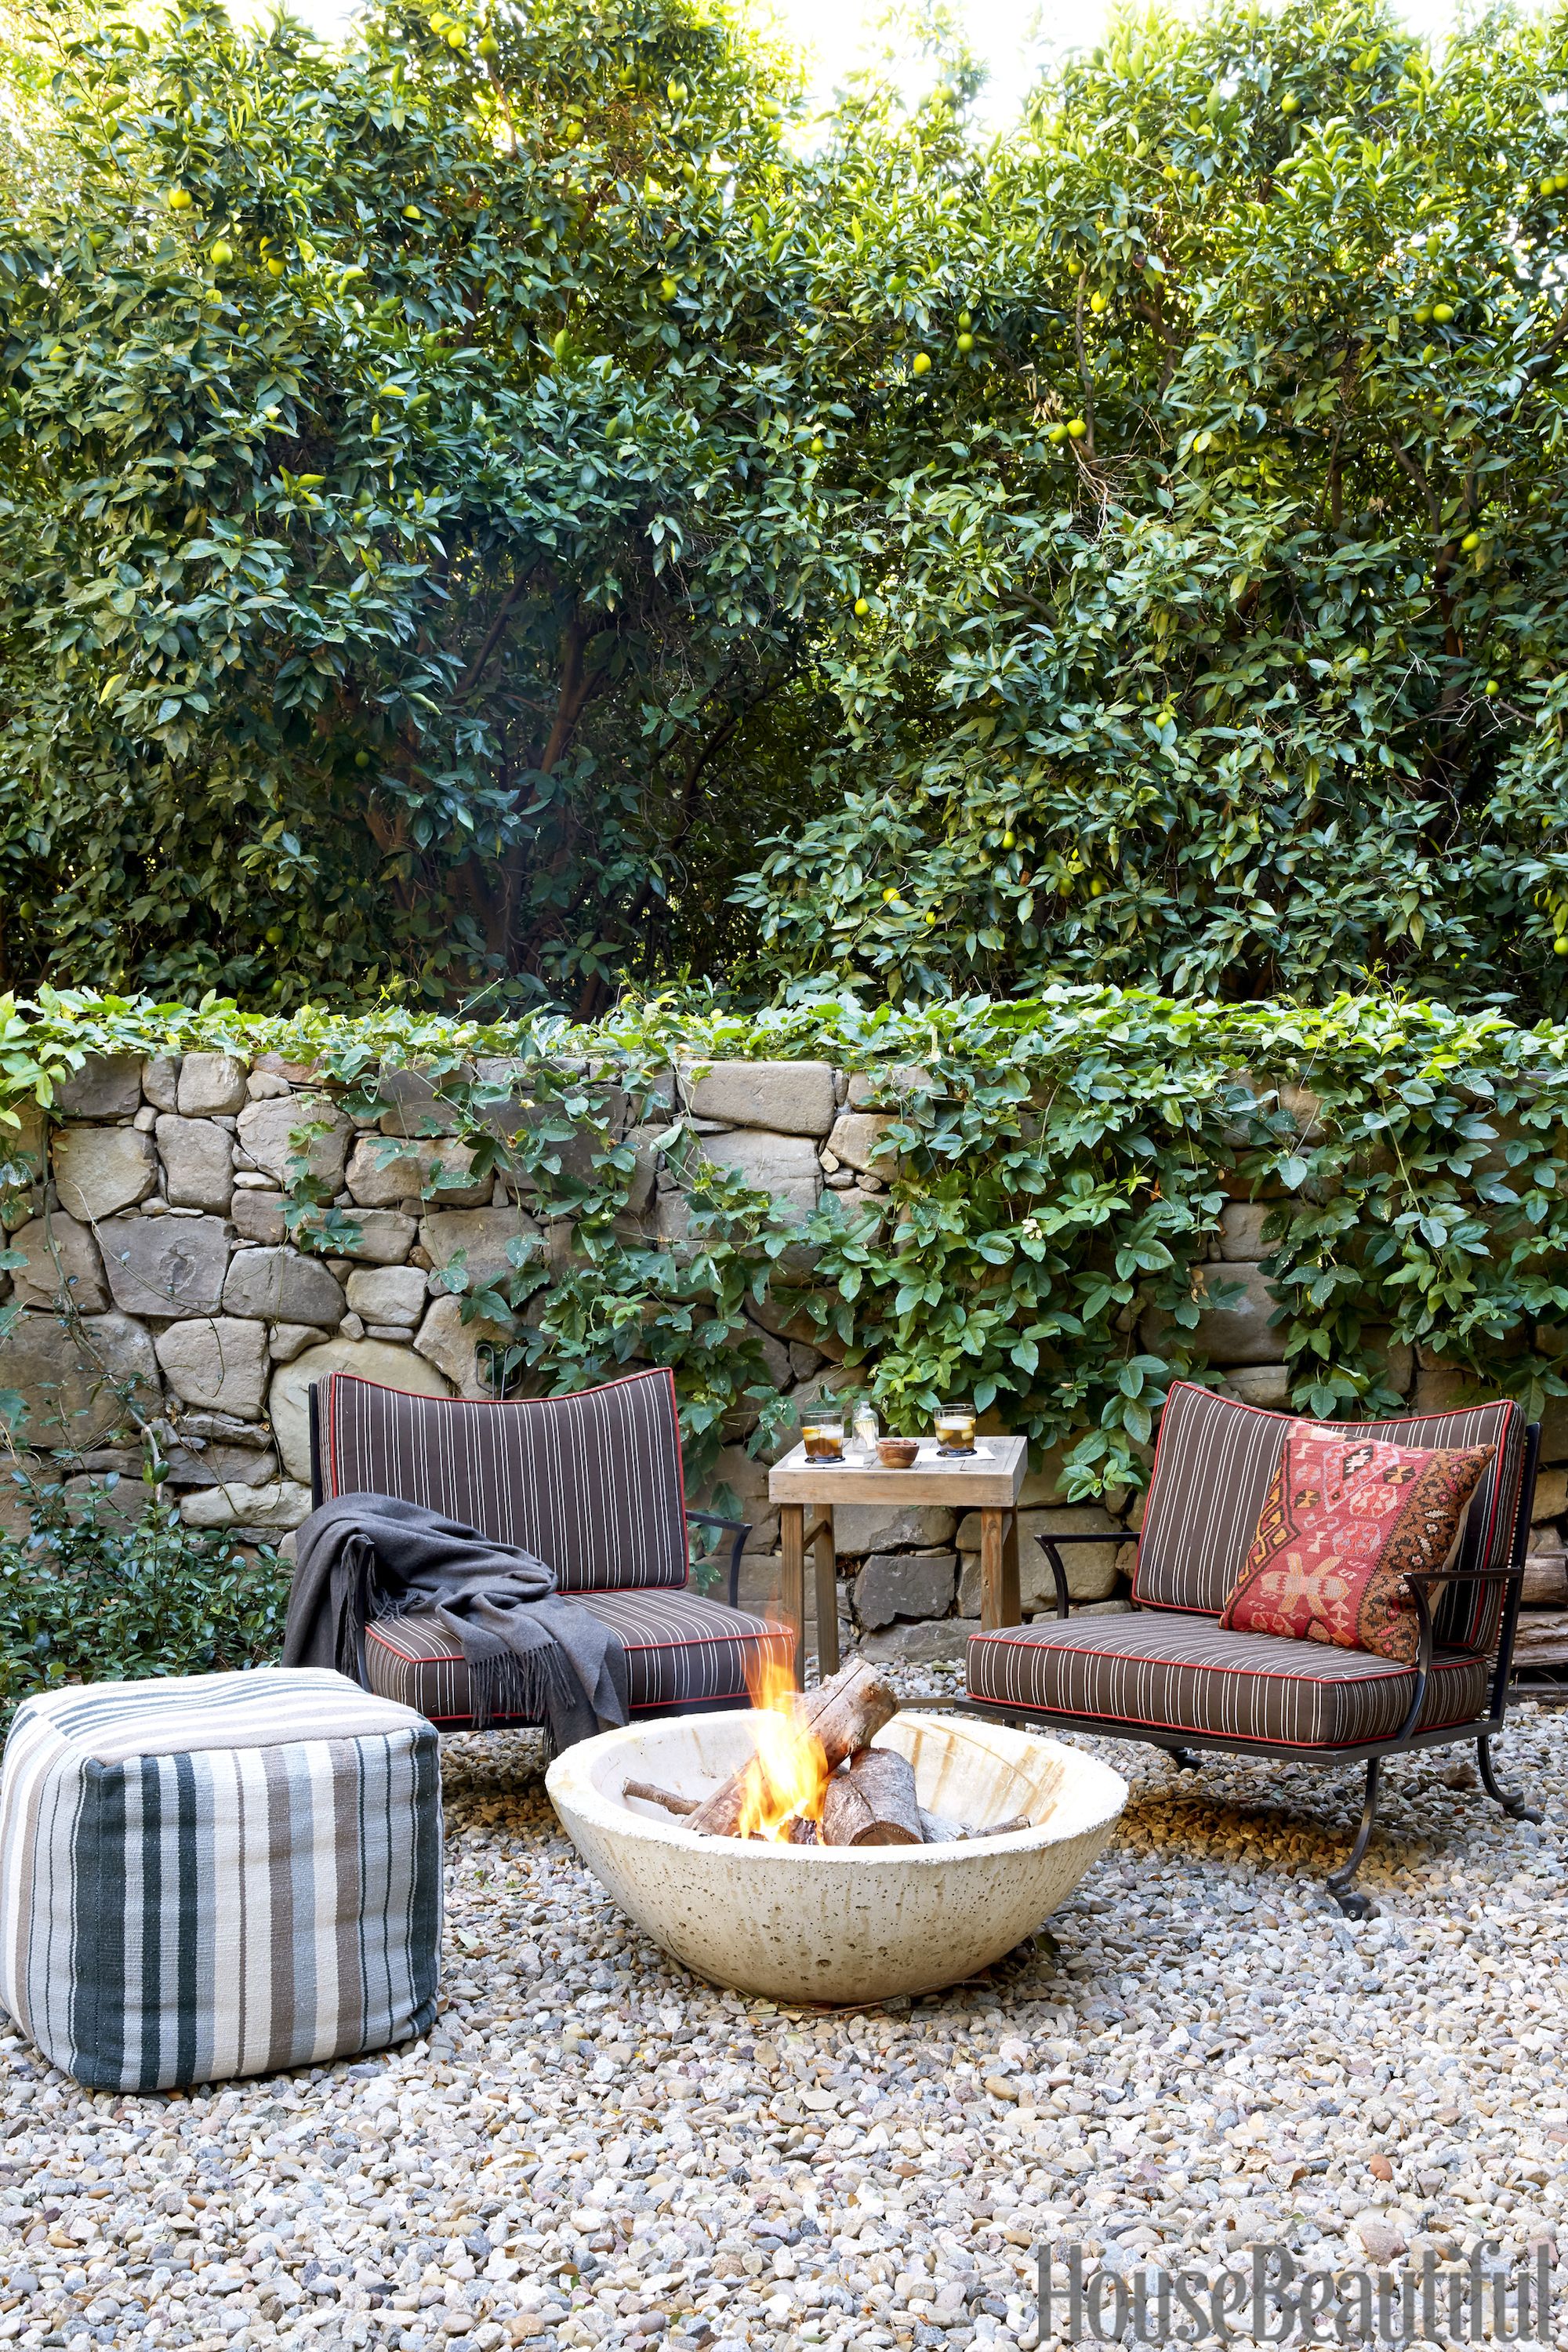 31 HQ Images Backyard Fireplace Plans : Outdoor Fireplace Plans Building Your Own Fireplace